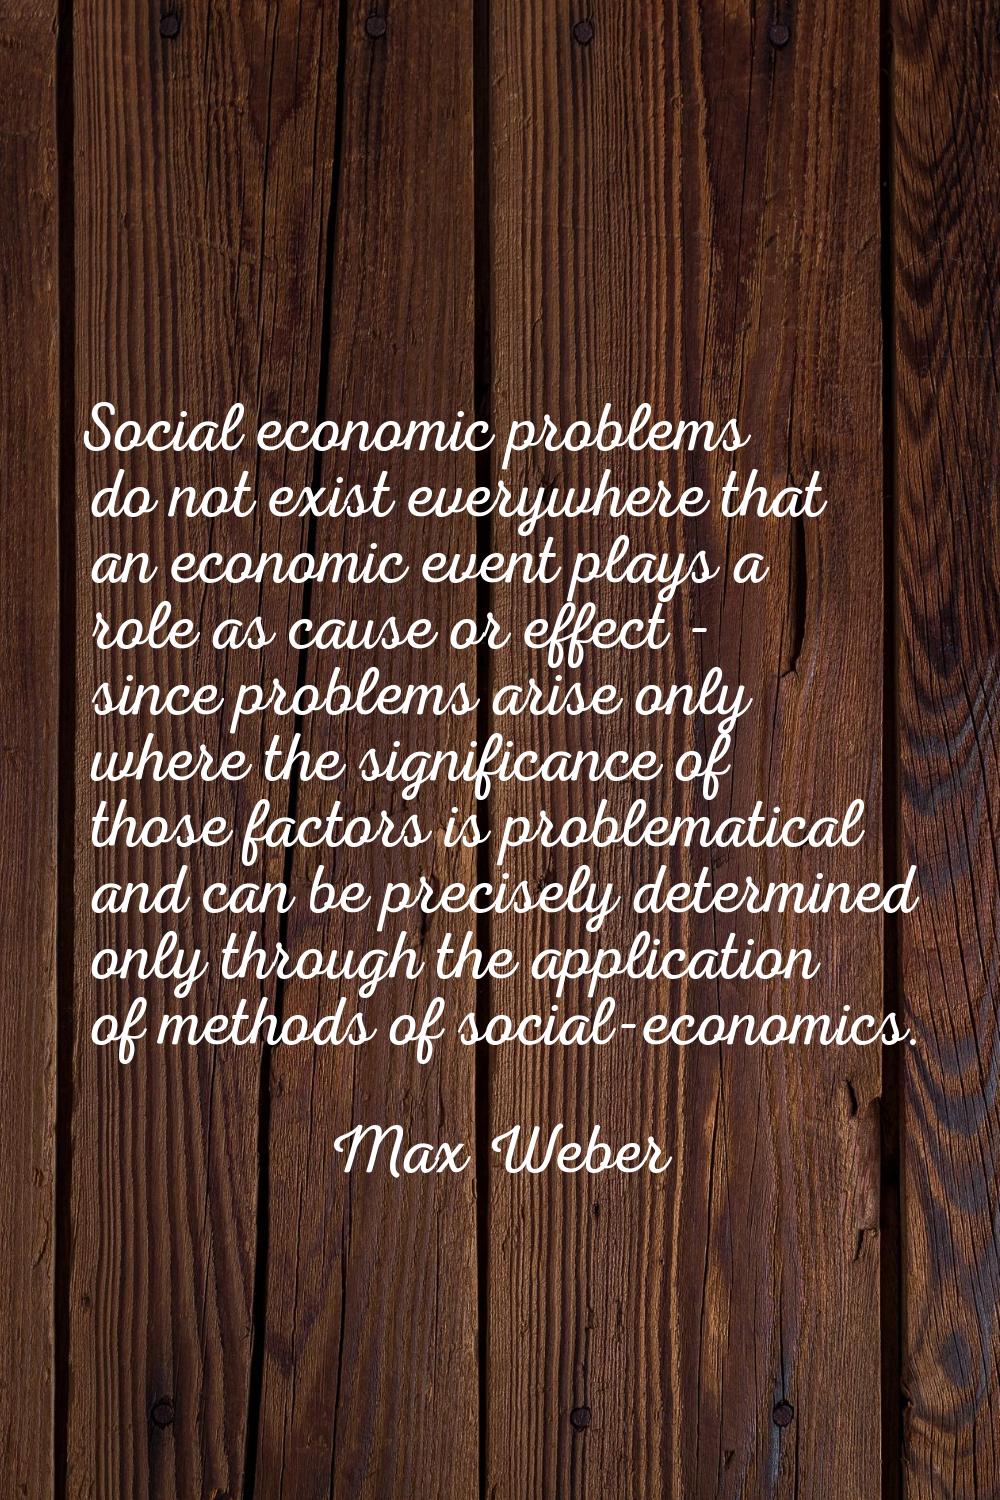 Social economic problems do not exist everywhere that an economic event plays a role as cause or ef